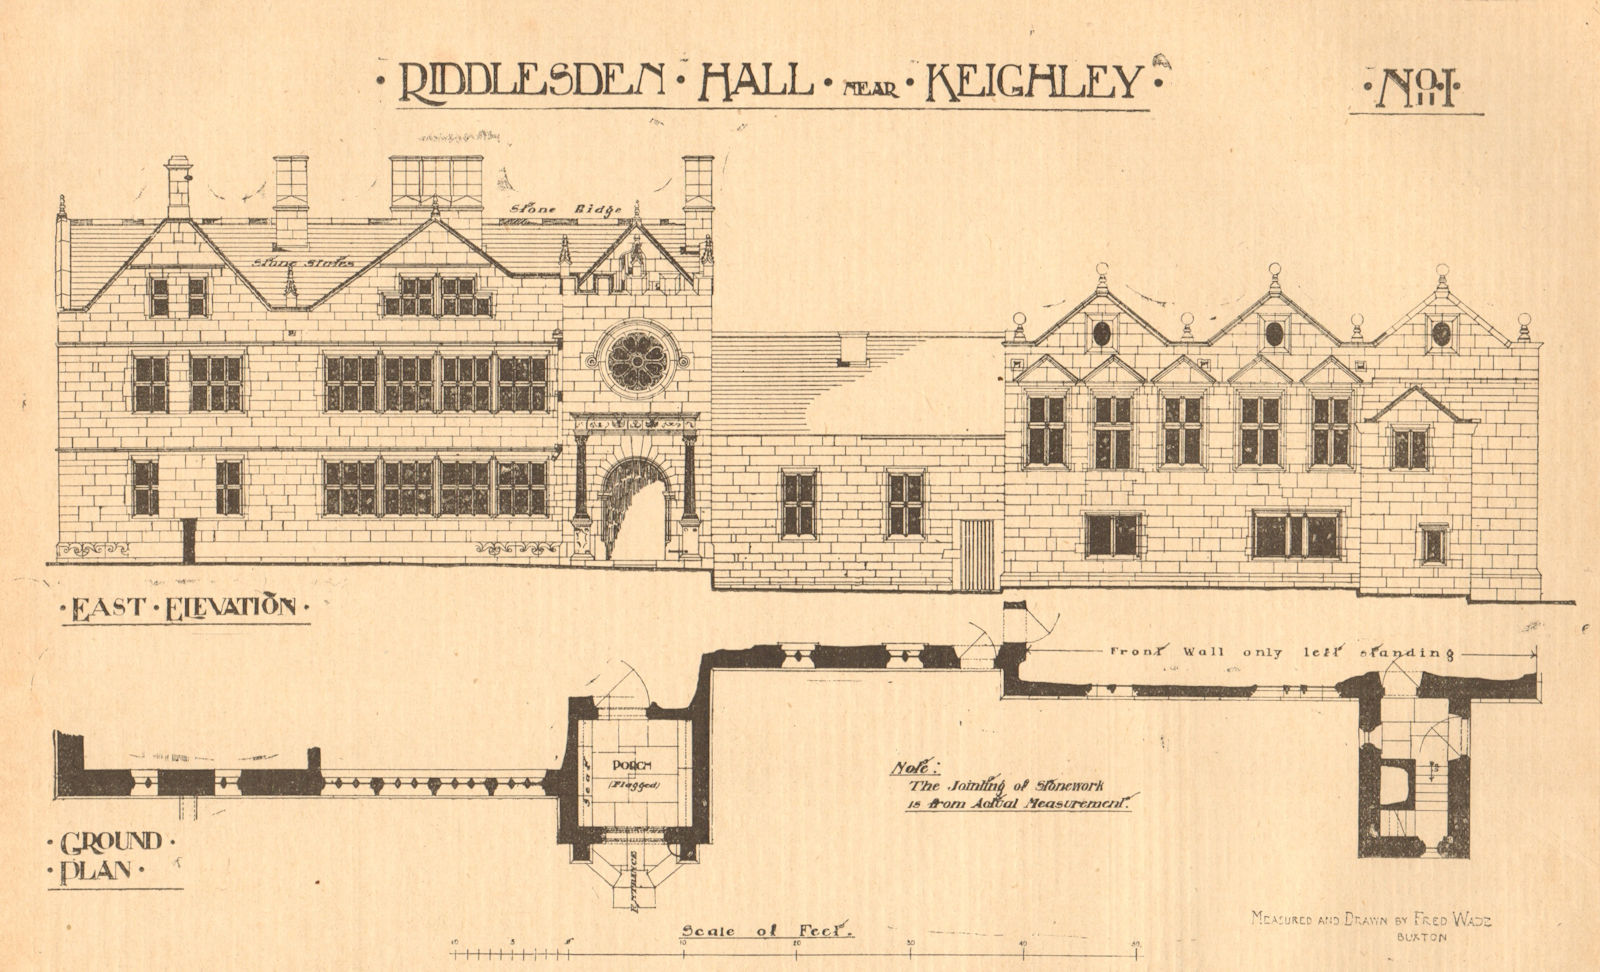 Riddlesden Hall near Keighley. Drawn by Fred Wade. Plan elevation Yorkshire 1904